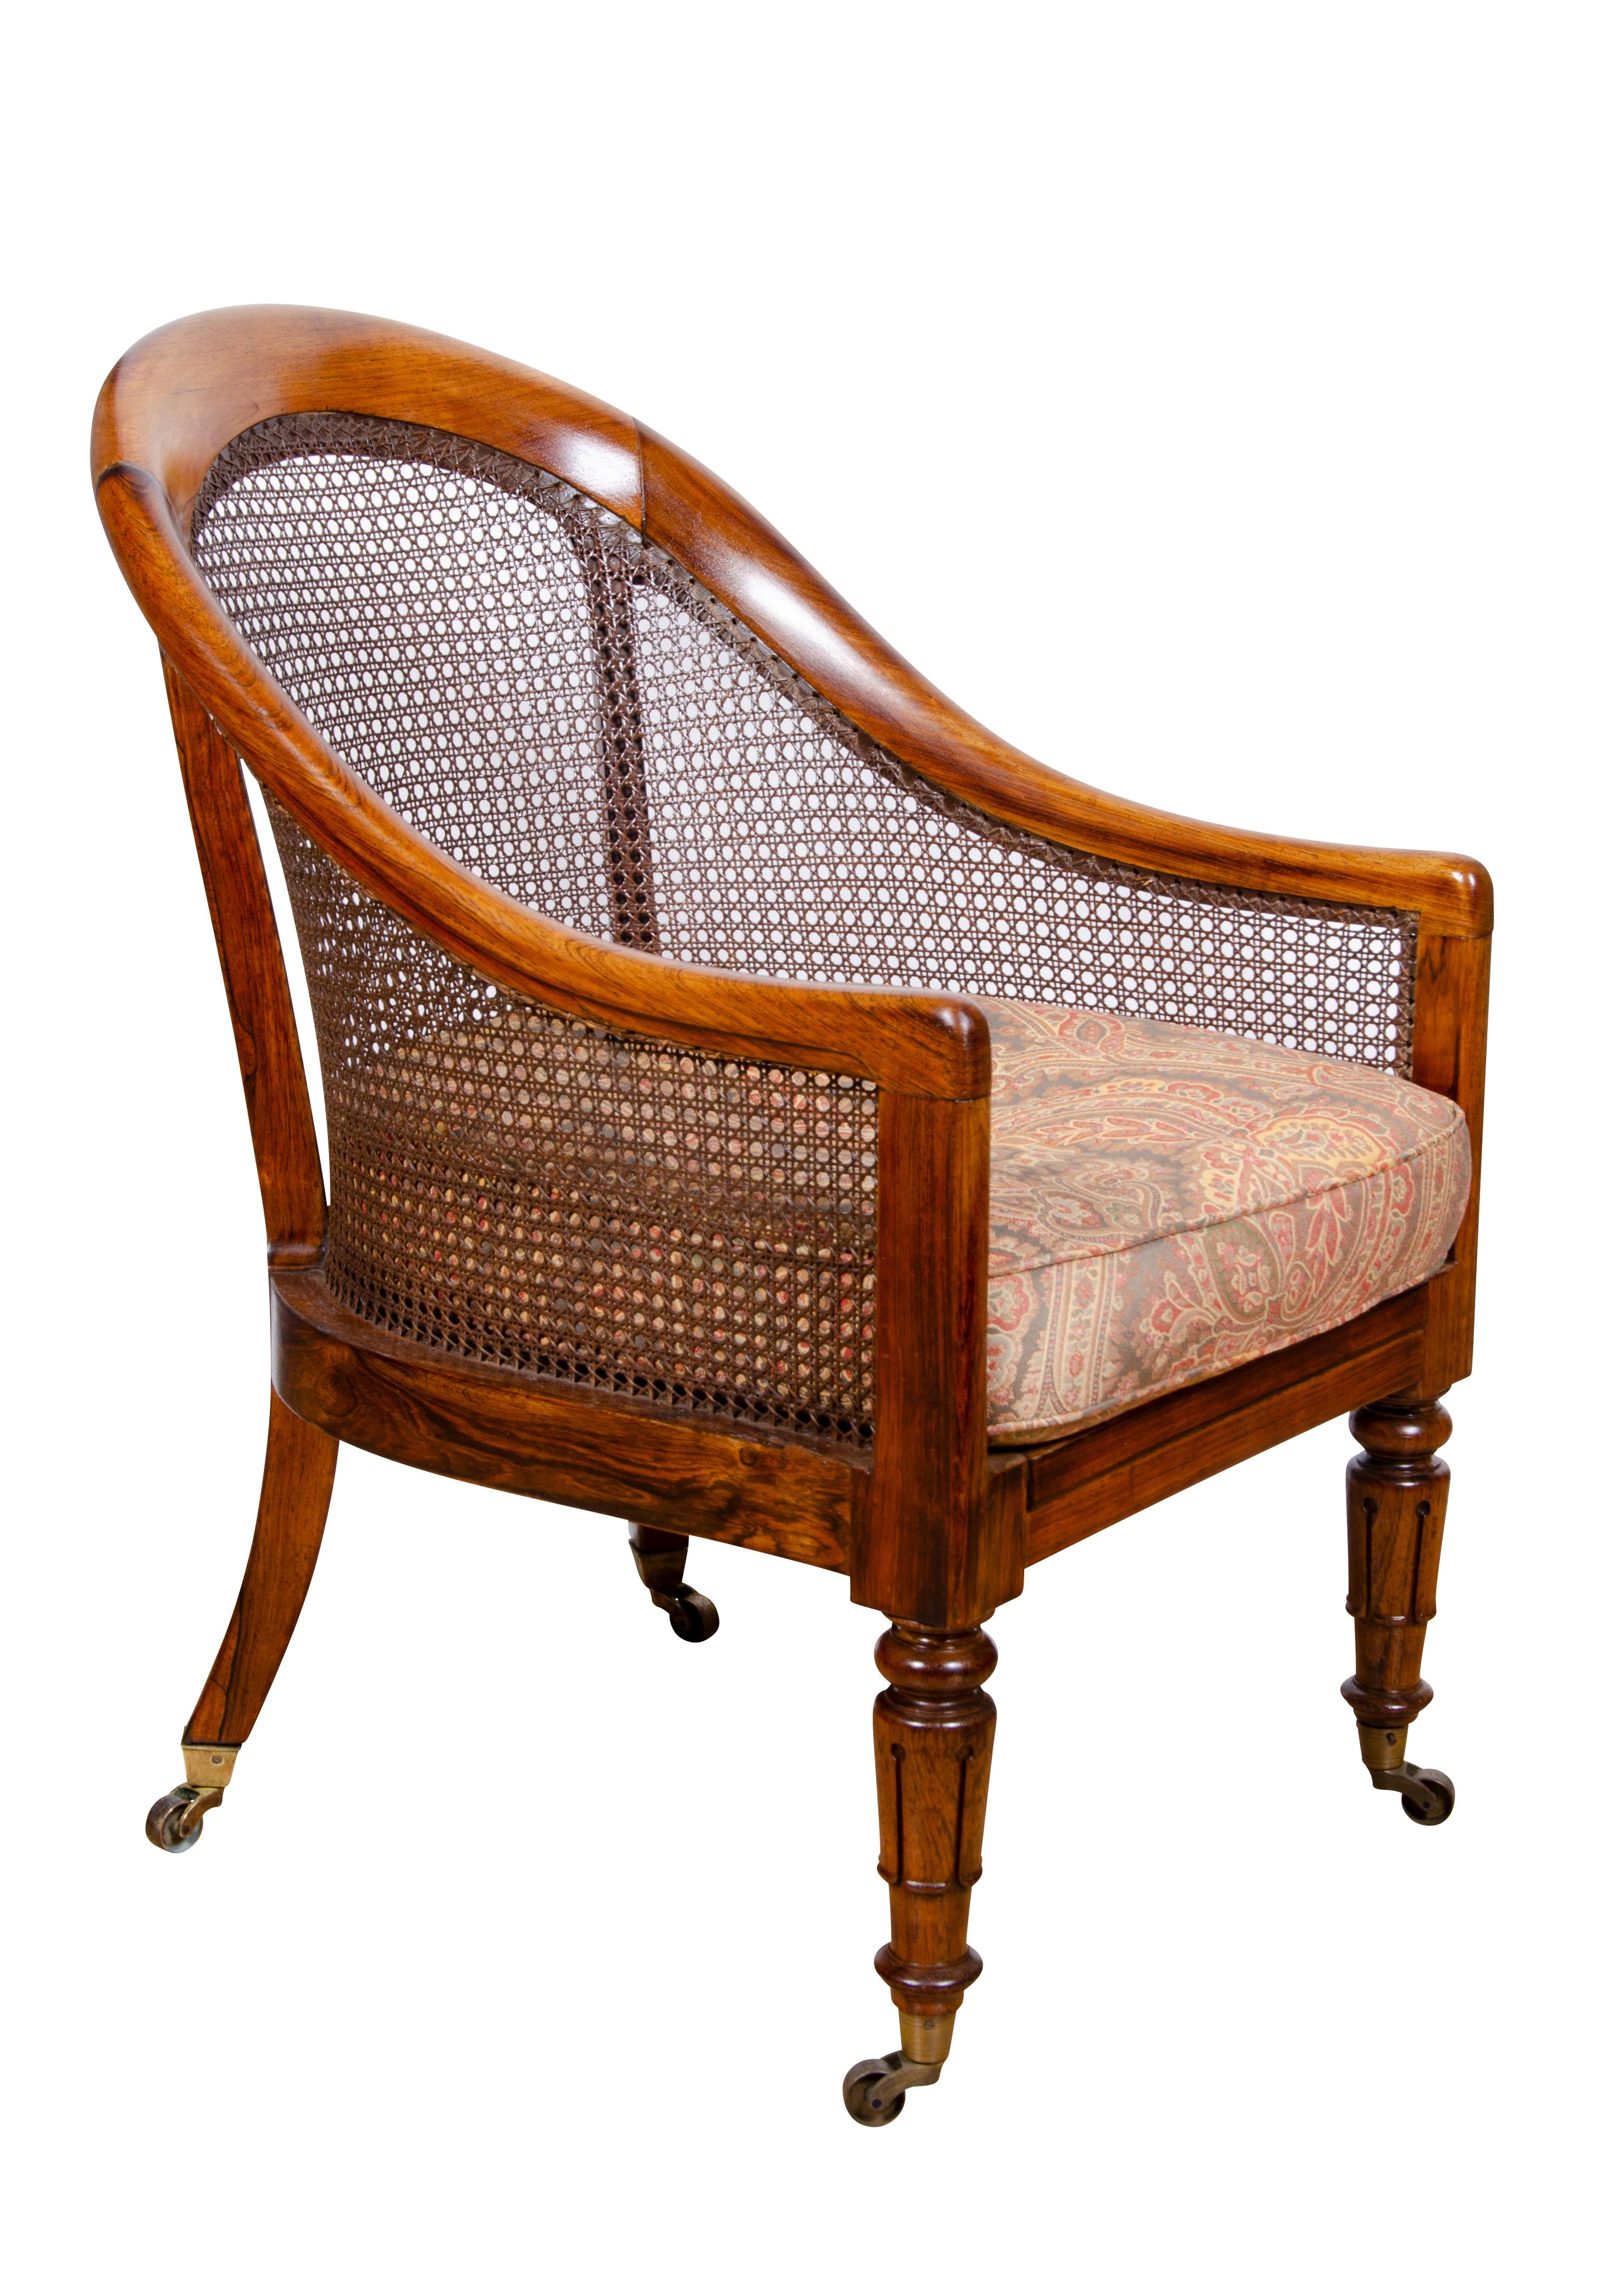 English Pair of William IV Rosewood Tub Chairs